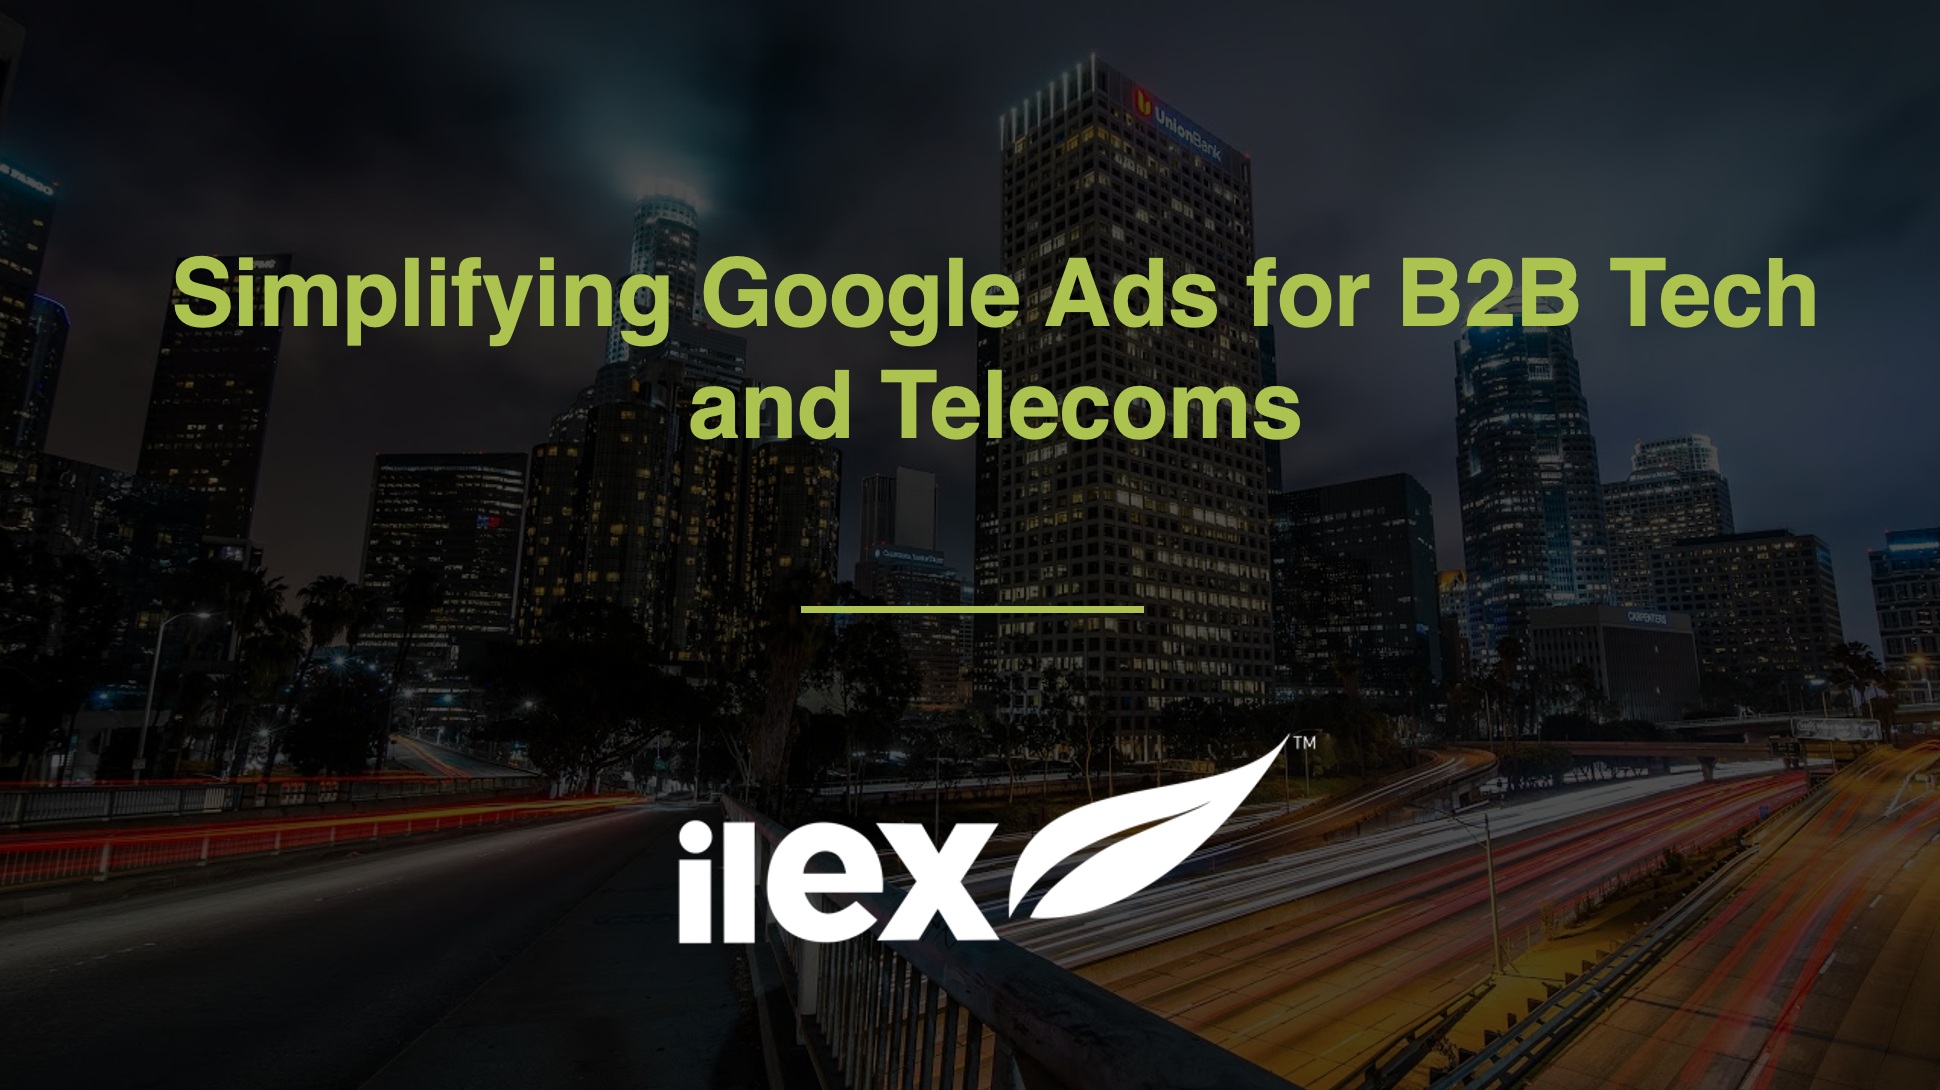 Simplifying Google Ads for B2B Tech and Telecoms